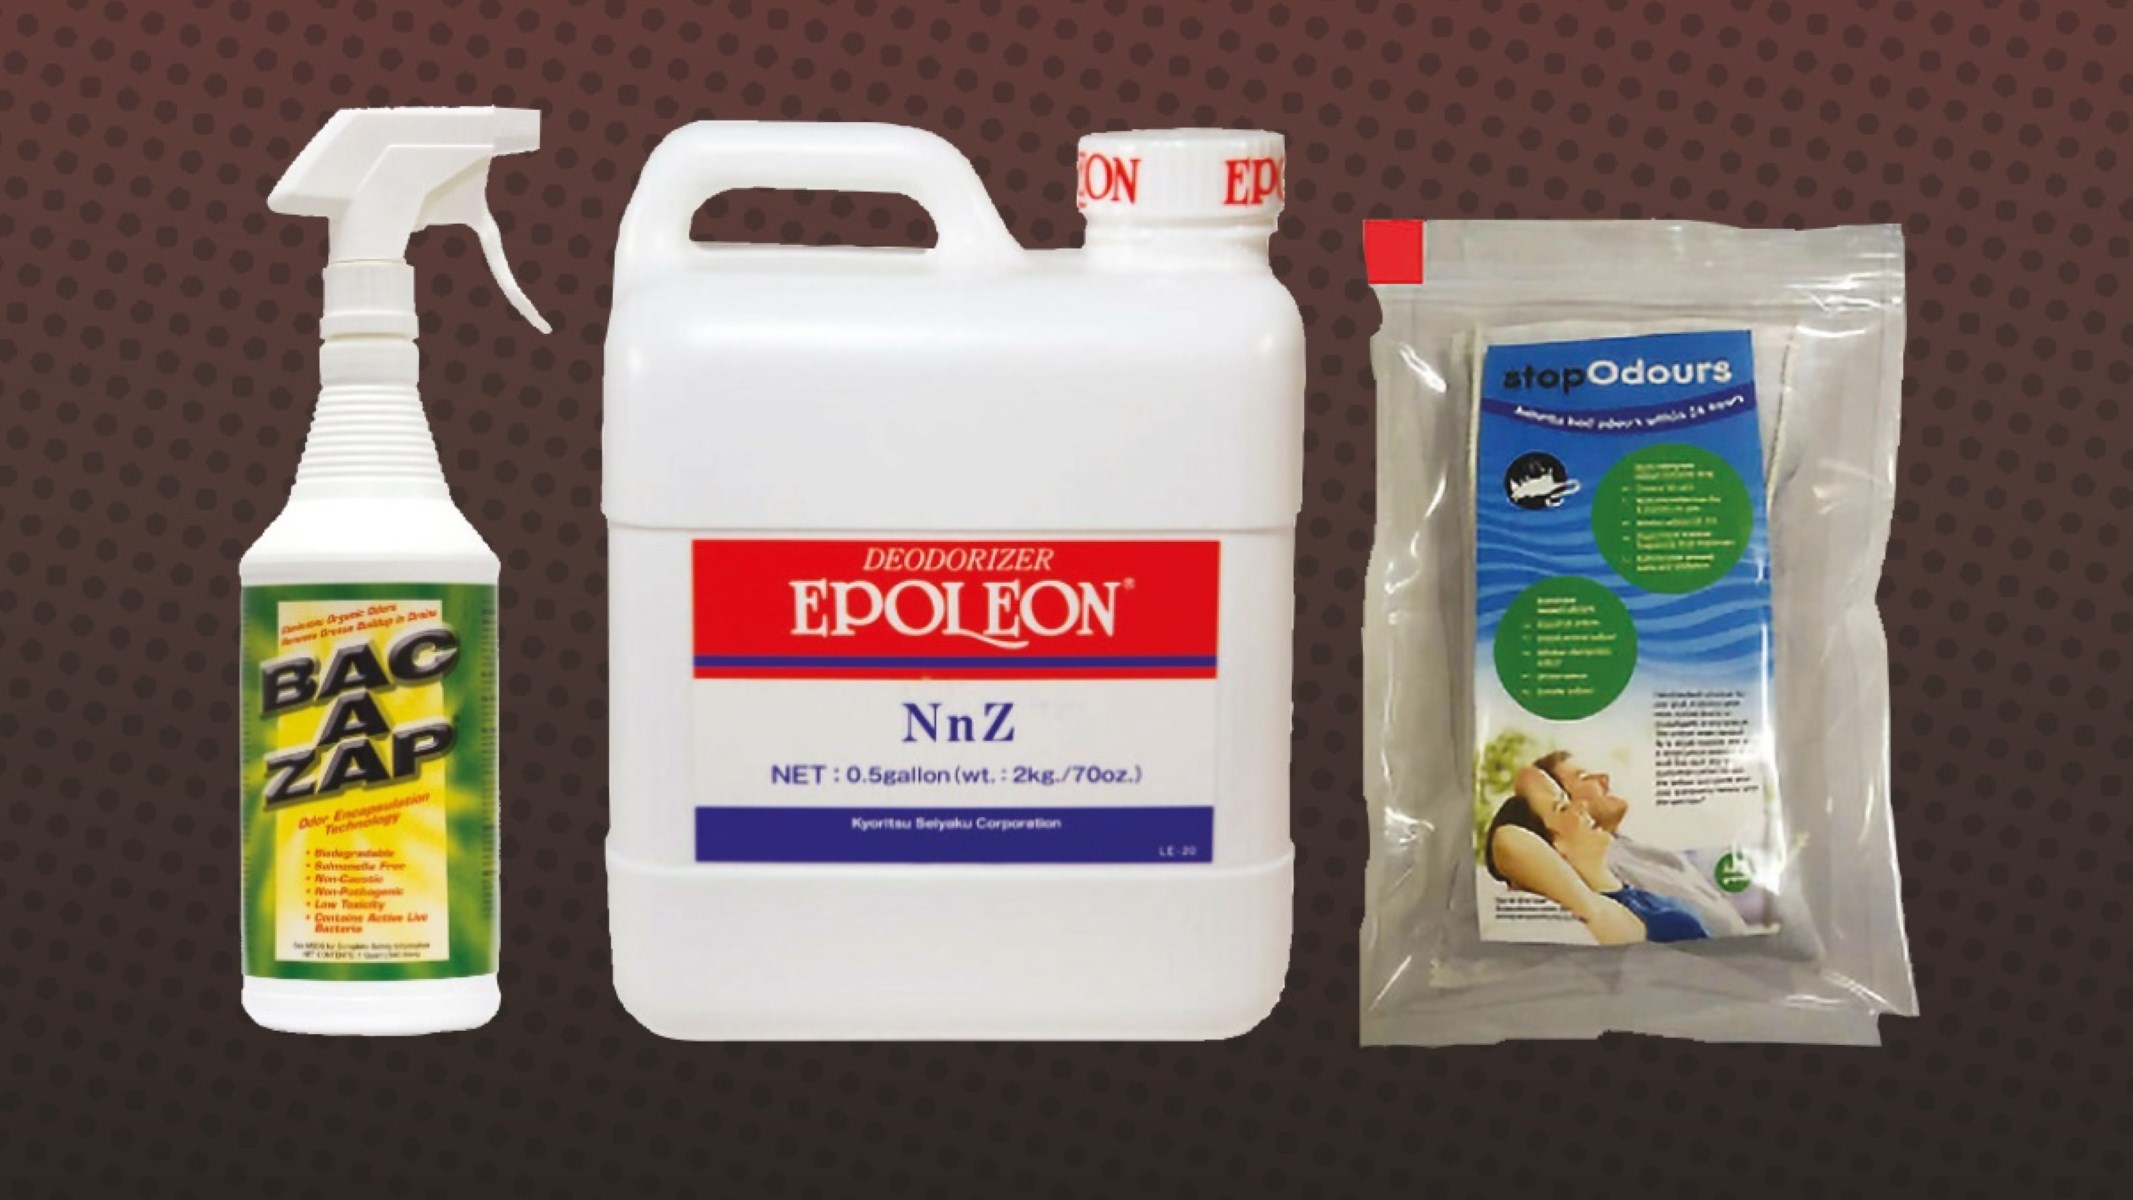 What Are The Directions For Using Deodorizer Epoleon NnZ?